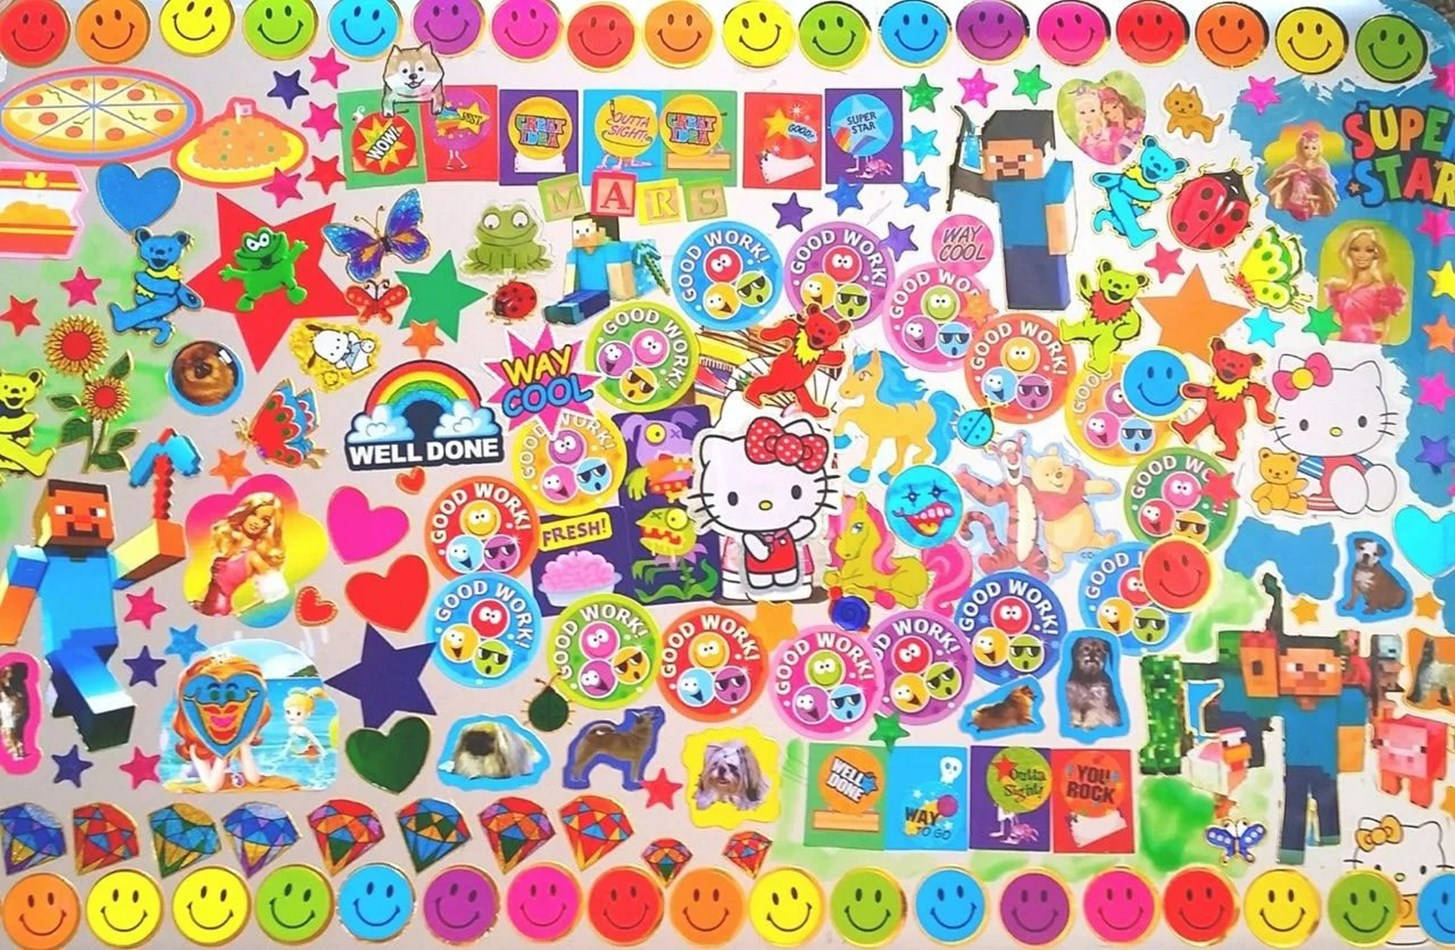 A Large Wall Of Stickers With Many Different Characters Wallpaper